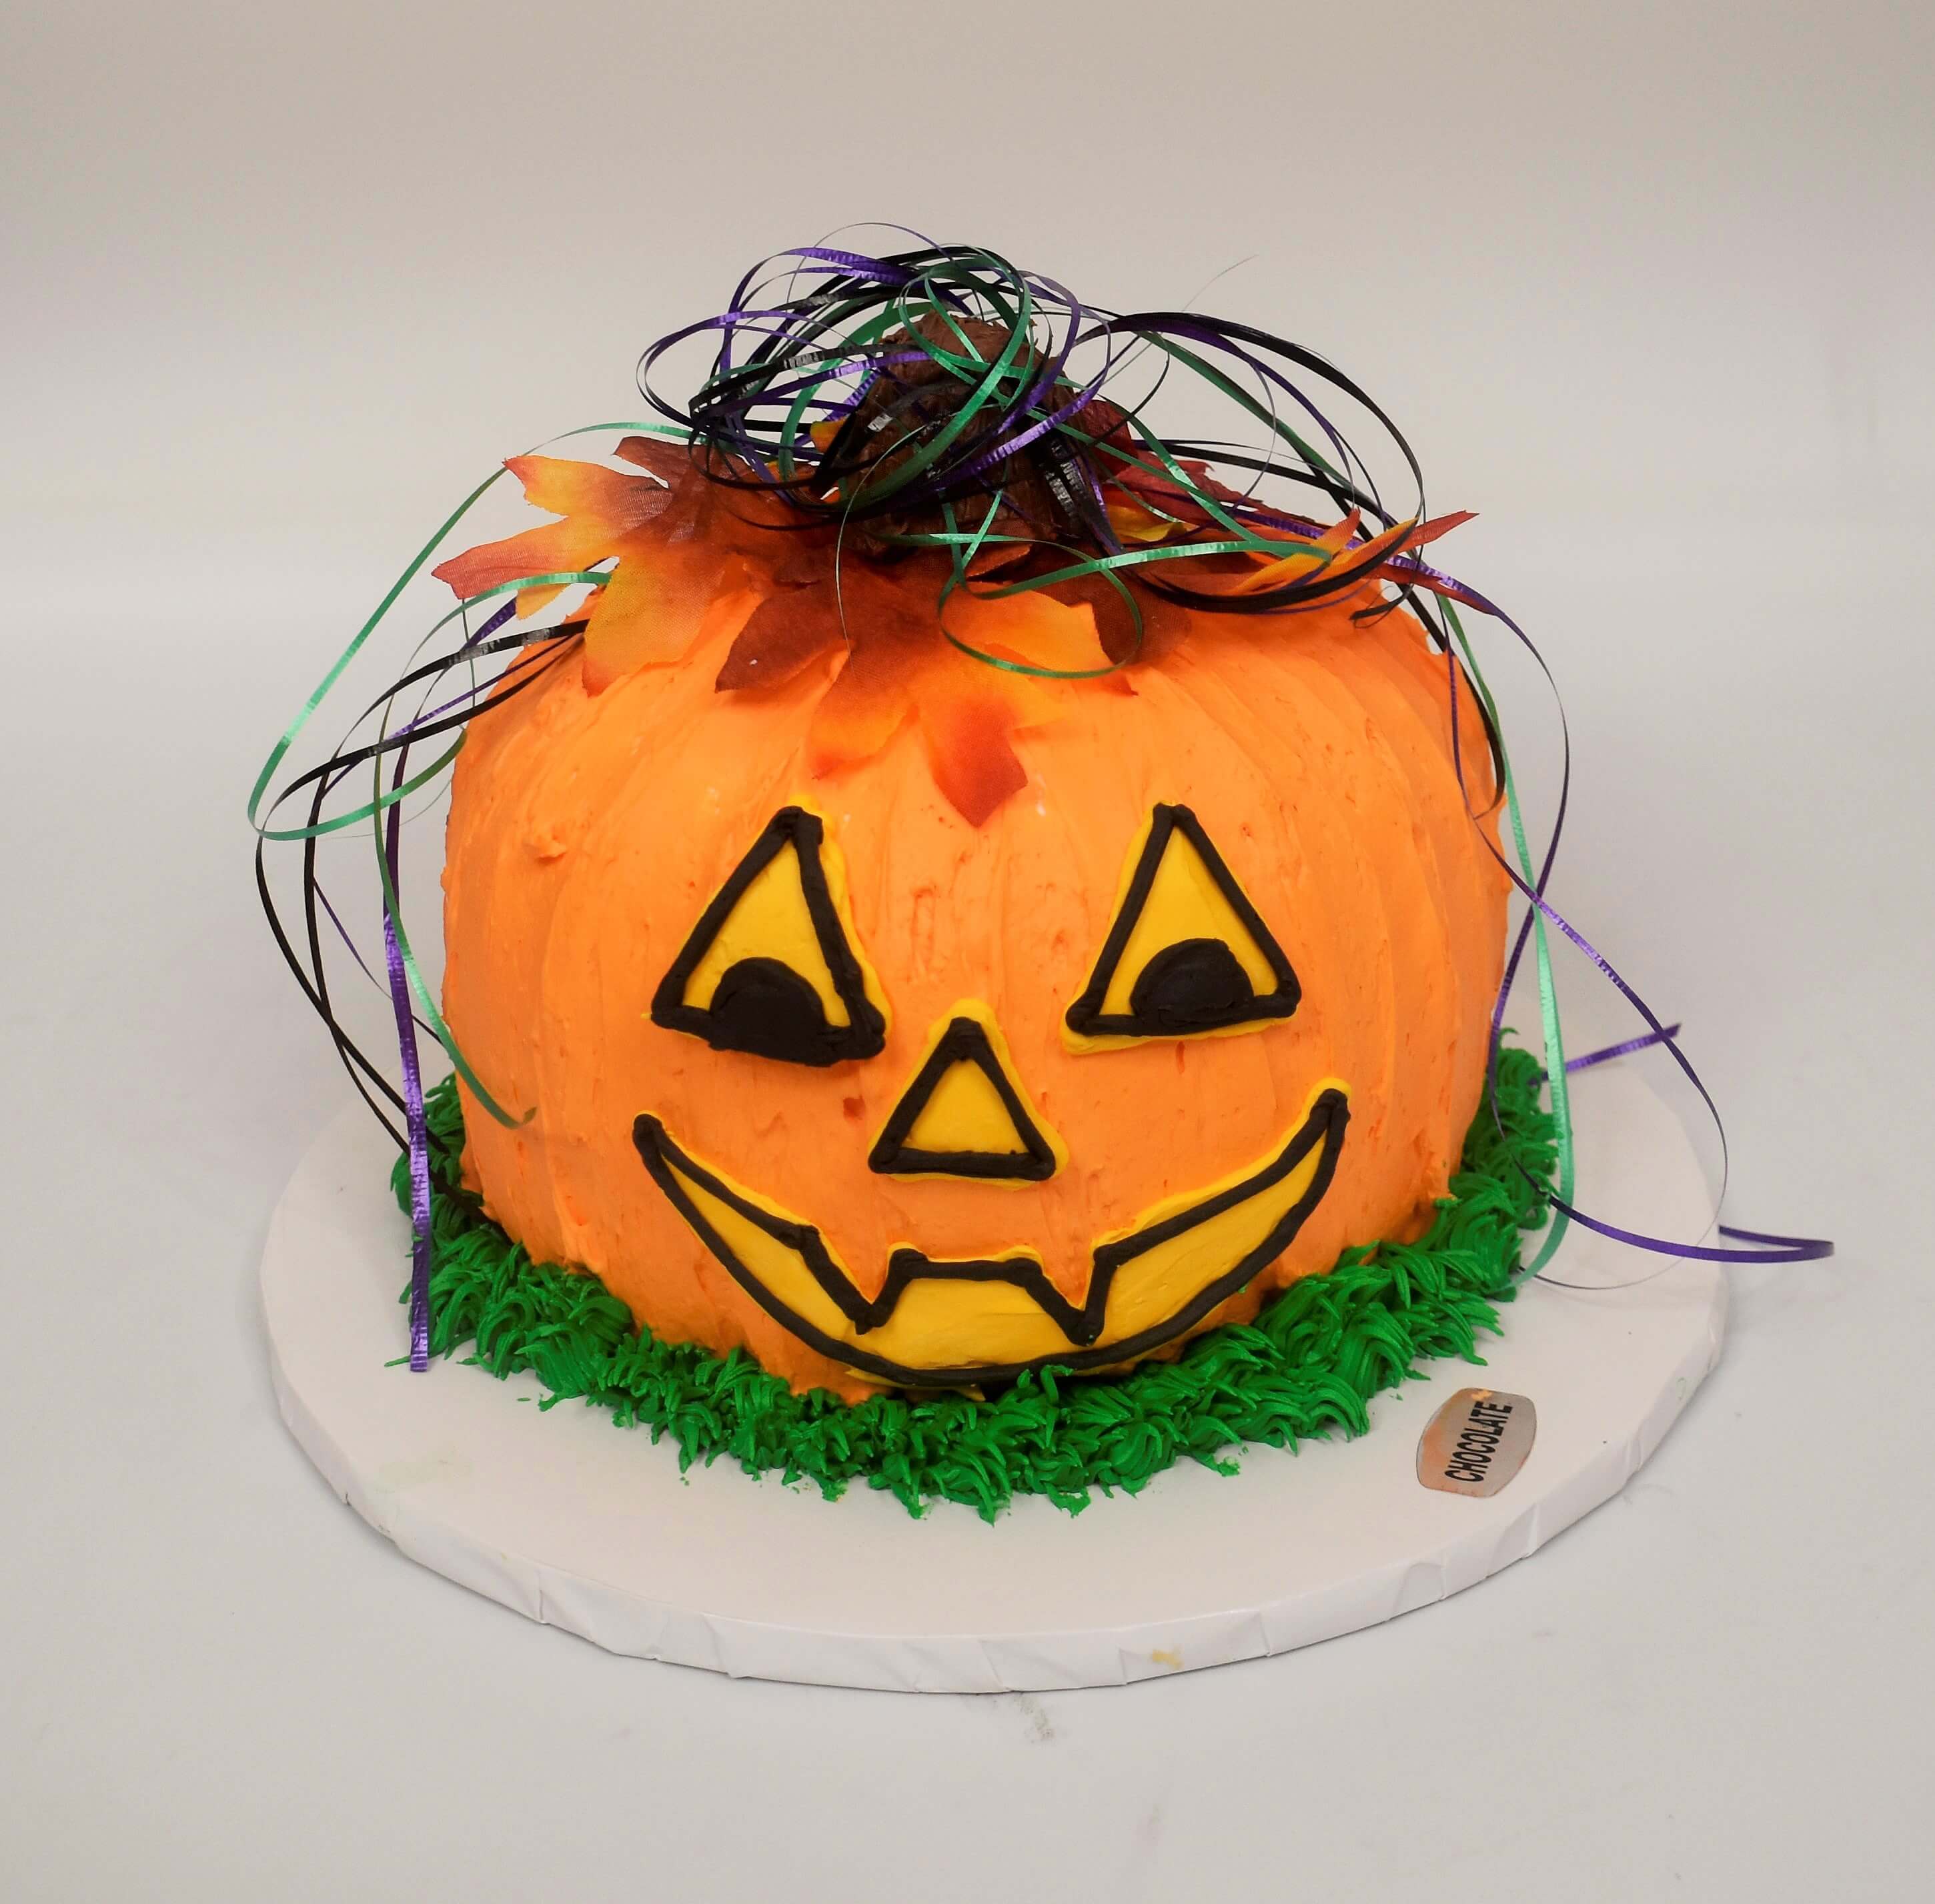 A McARthur's Party Cake of a Smiling Pumpkin for Halloween.